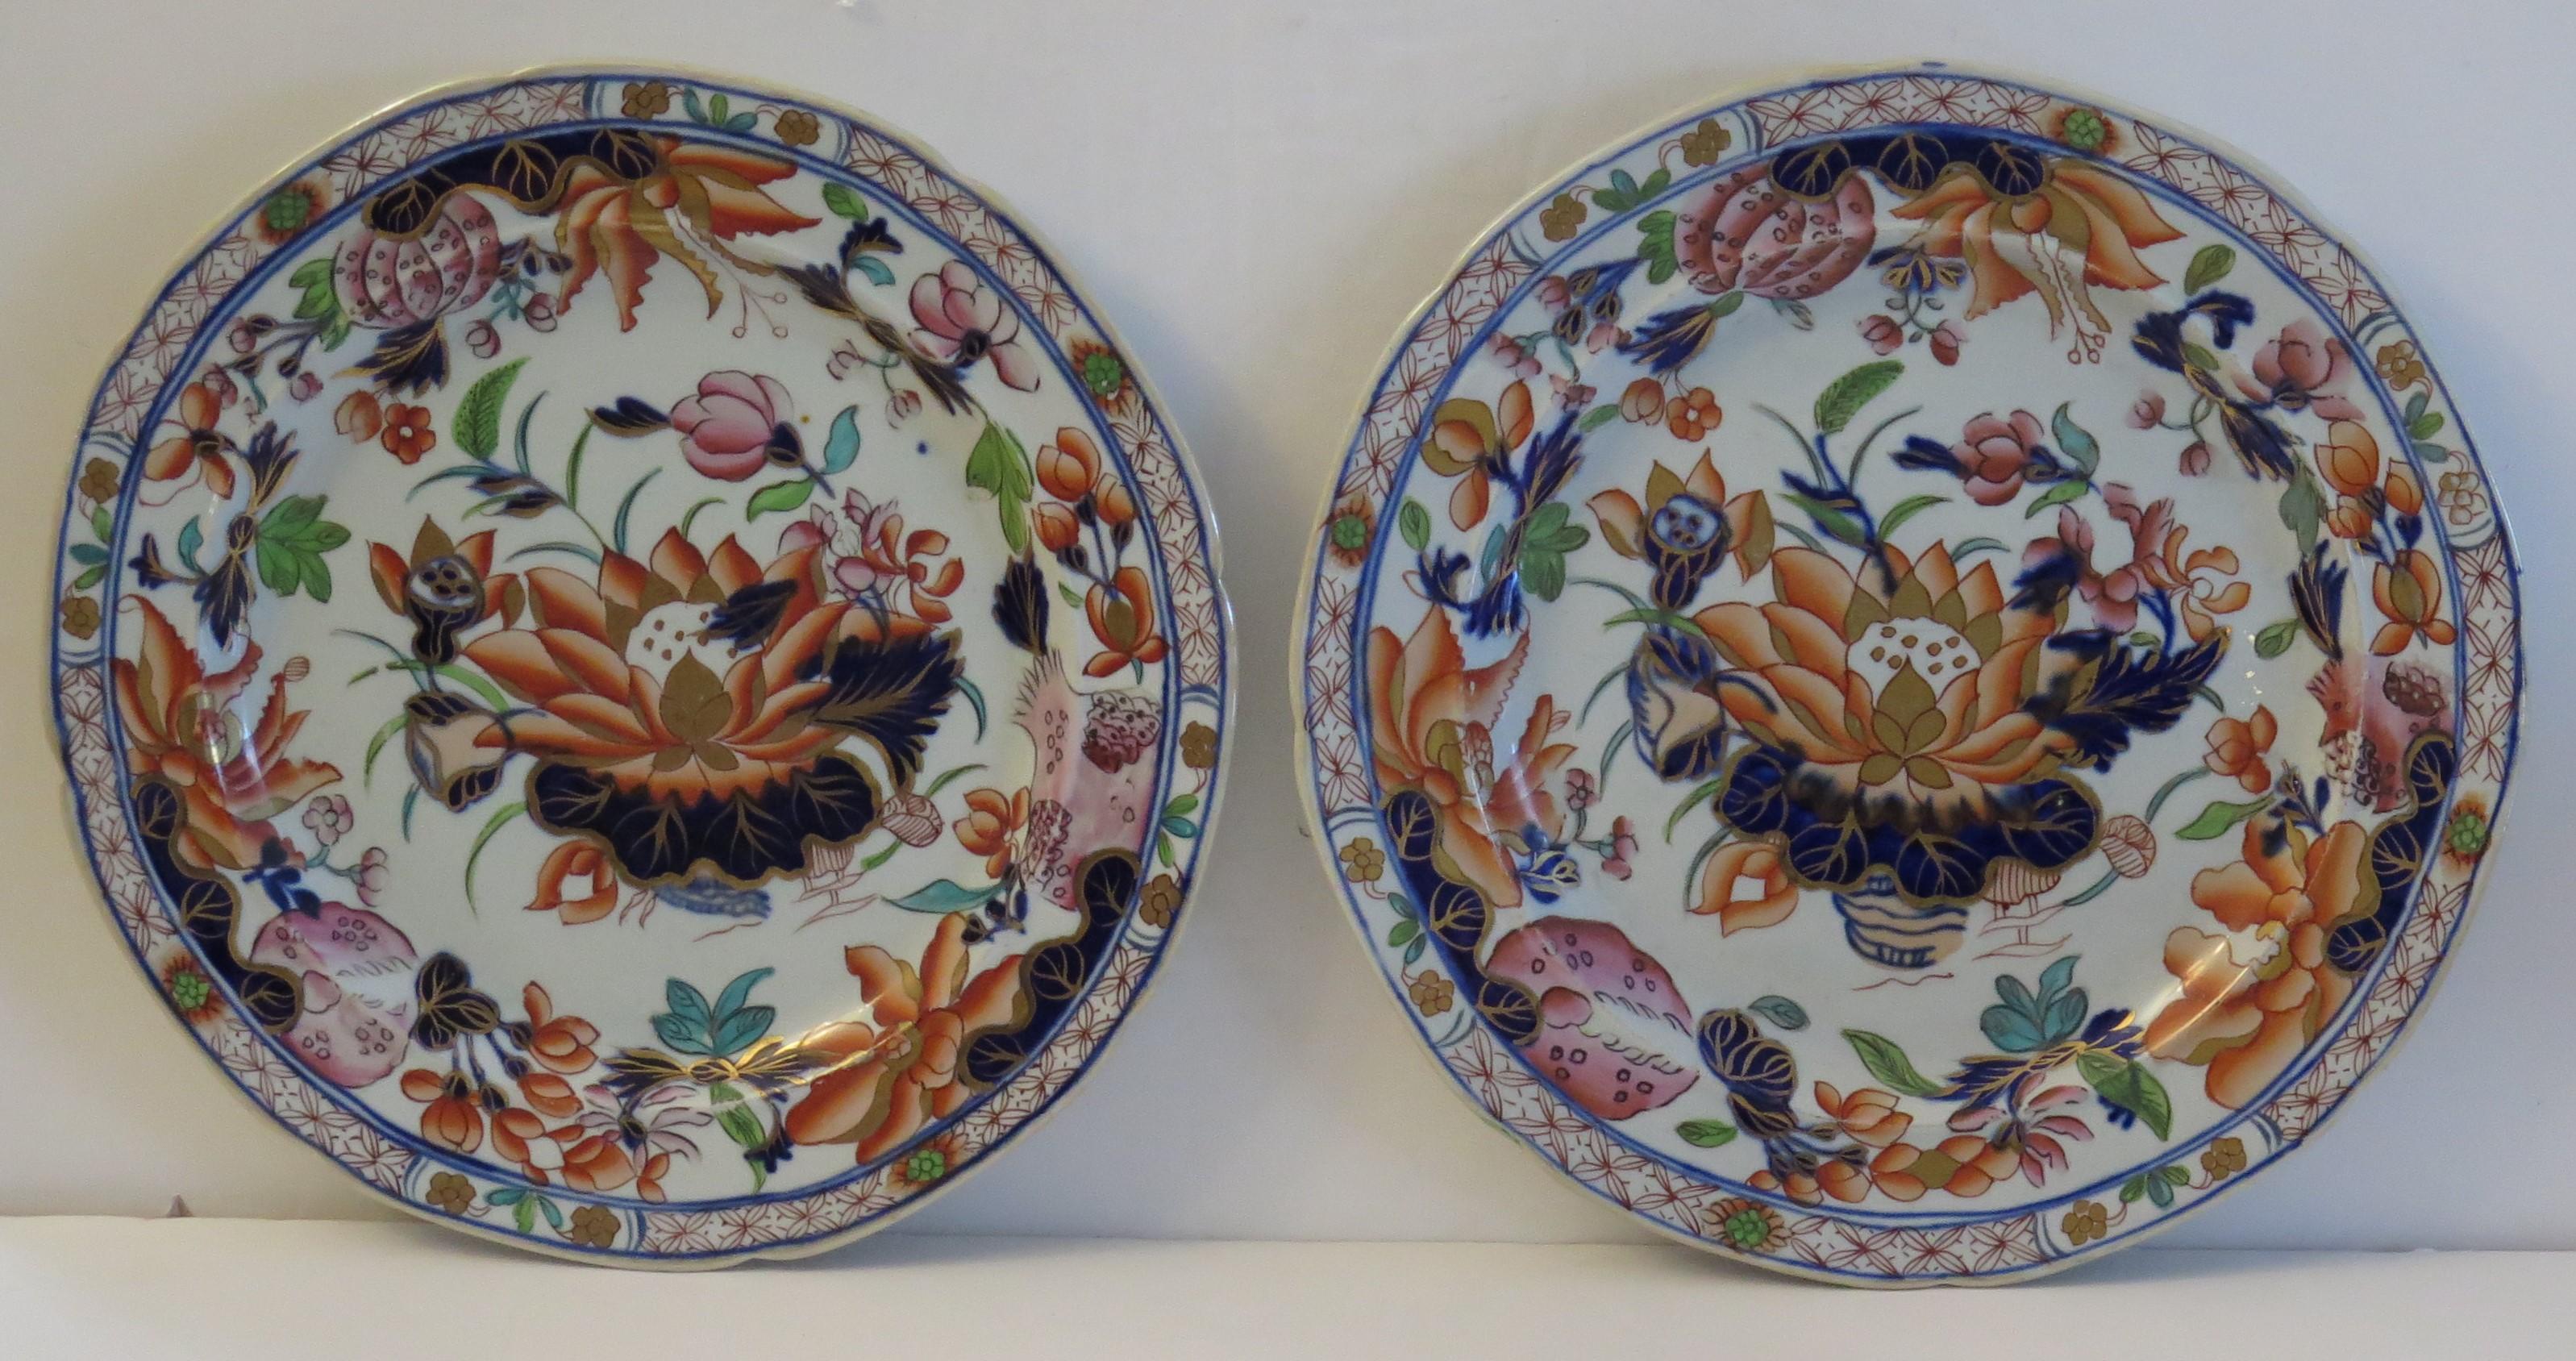 These are a very good pair of early Mason's Ironstone pottery Dinner Plates in the very decorative Water Lily pattern, produced by the Mason's factory at Lane Delph, Staffordshire, England, circa 1813-1820.

The plates are circular with radial